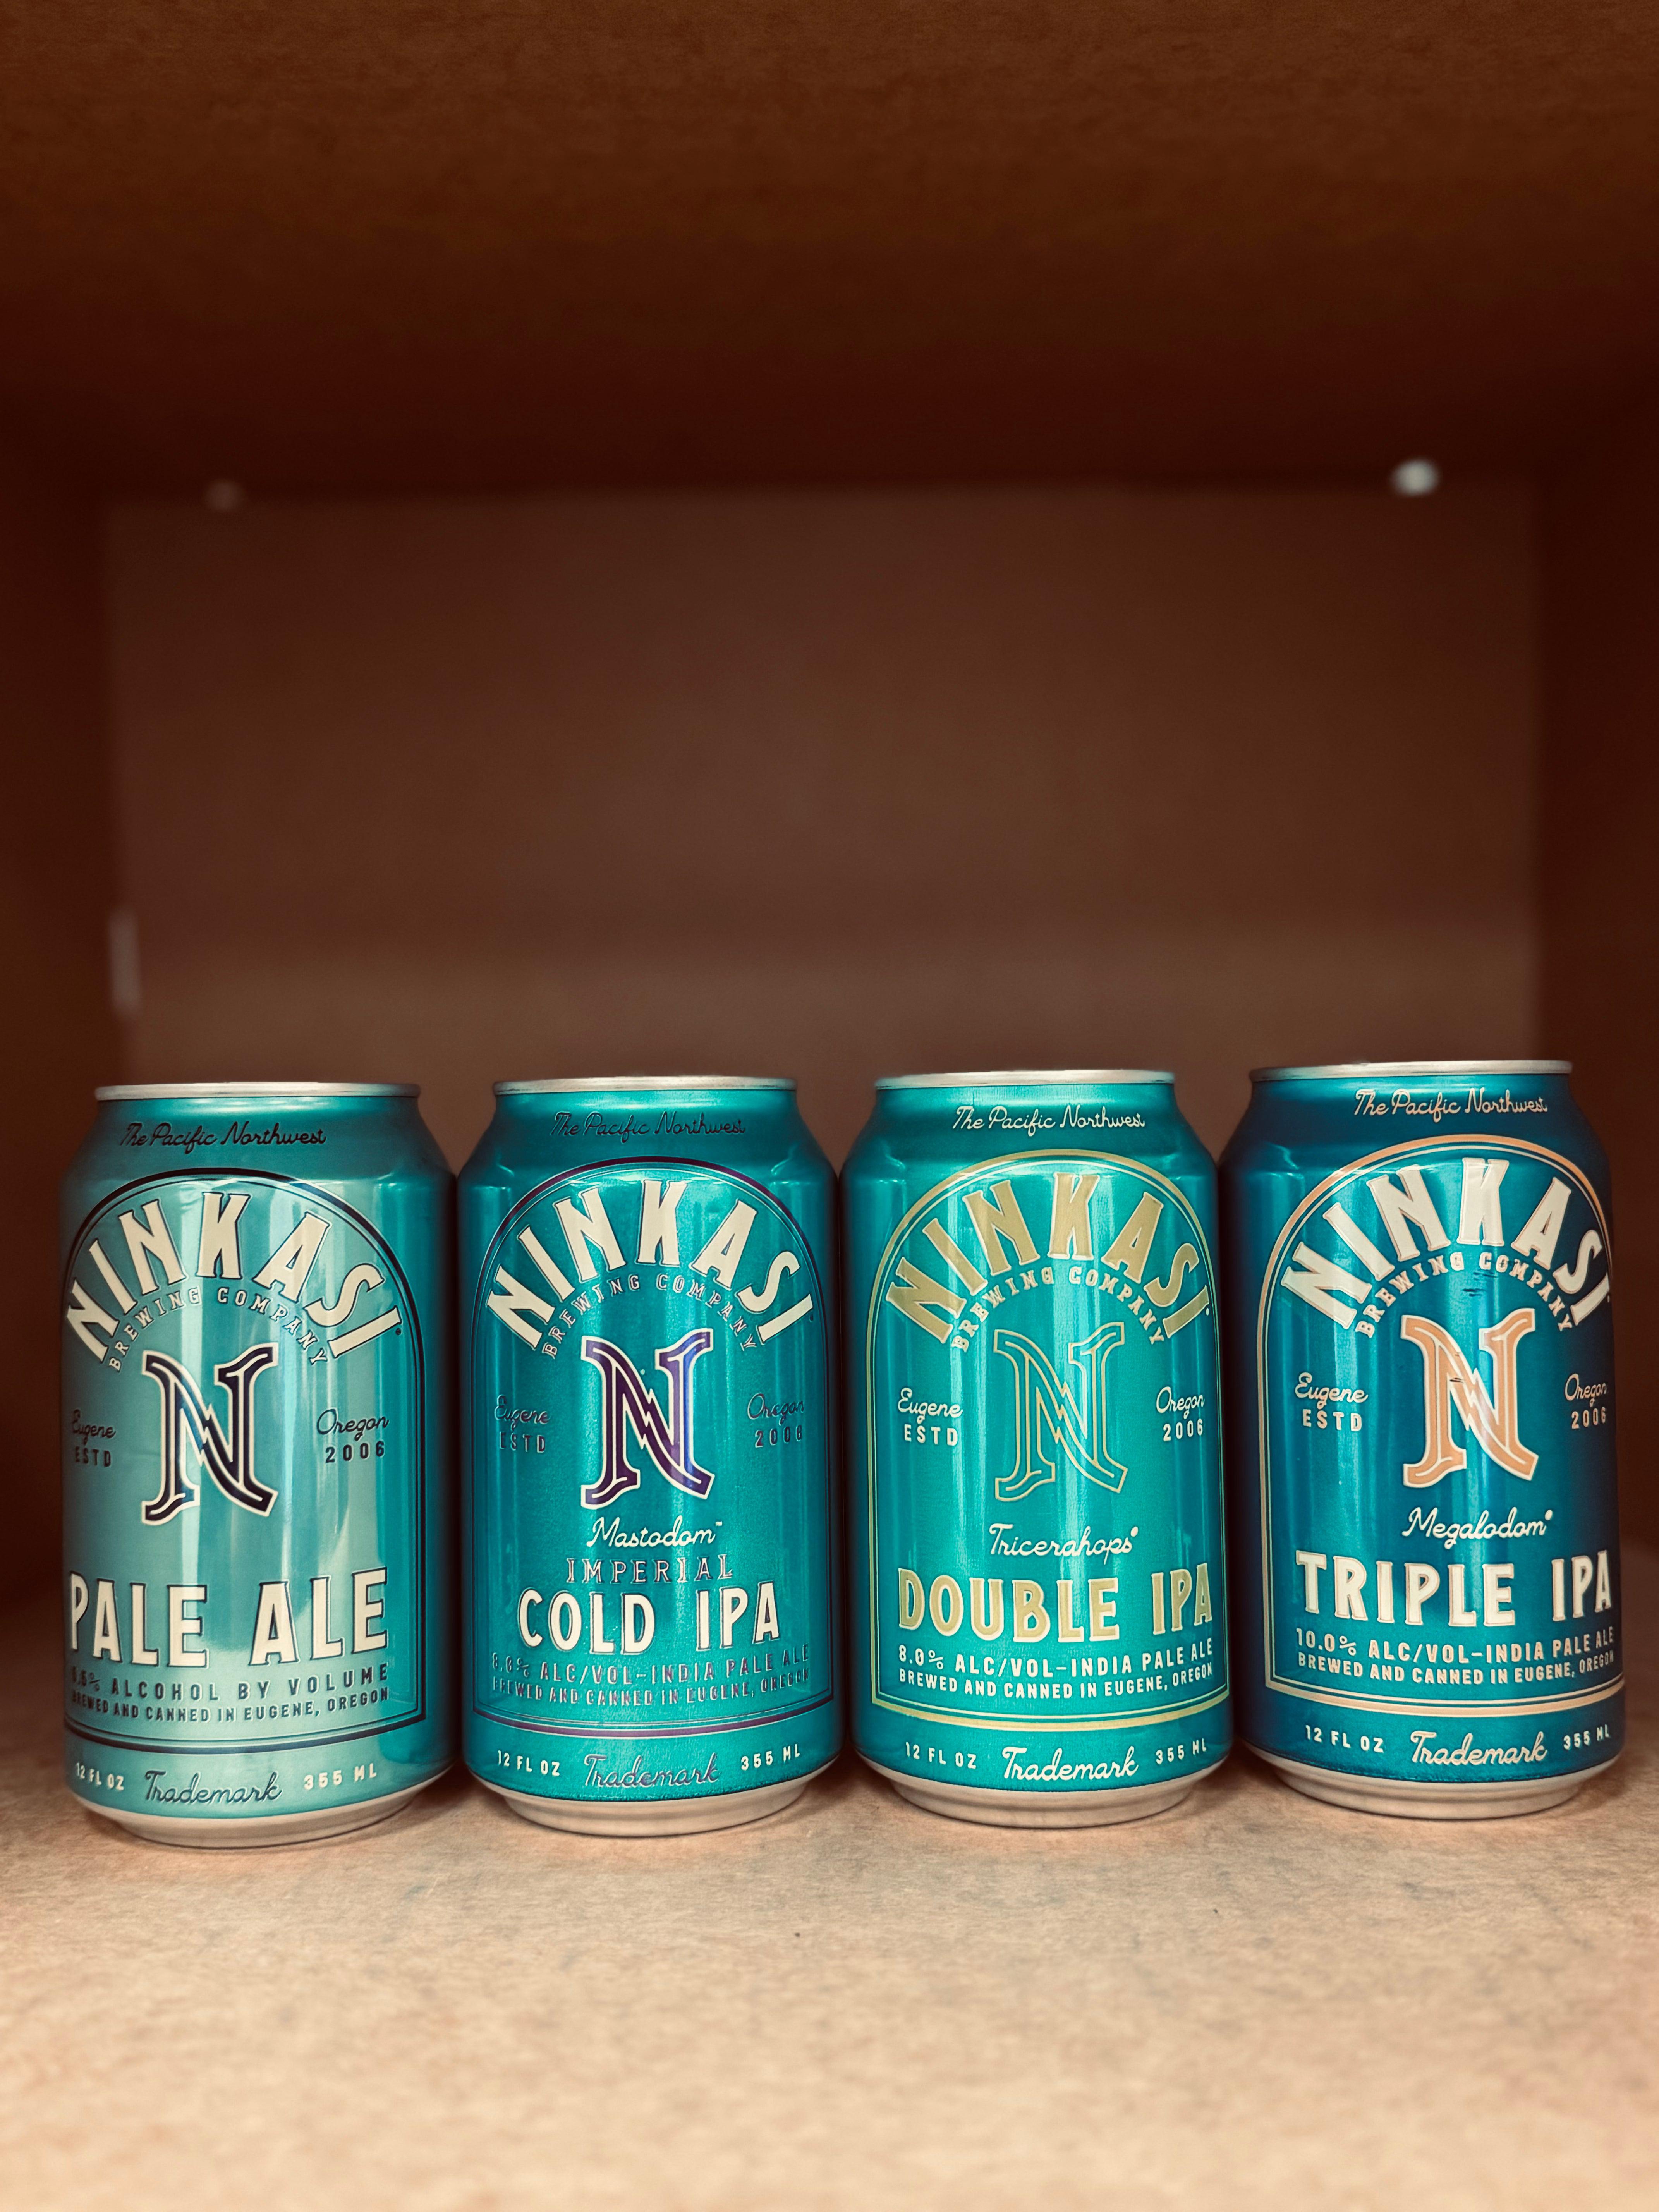 -Ninkasi- Ninkasi 🚀 Take Off Set 1-Packs & Cases- Only @ Beer Republic - The best online beer store for American & Canadian craft beer - Buy beer online from the USA and Canada - Bier online kopen - Amerikaans bier kopen - Craft beer store - Craft beer kopen - Amerikanisch bier kaufen - Bier online kaufen - Acheter biere online - IPA - Stout - Porter - New England IPA - Hazy IPA - Imperial Stout - Barrel Aged - Barrel Aged Imperial Stout - Brown - Dark beer - Blond - Blonde - Pilsner - Lager - Wheat - Weize